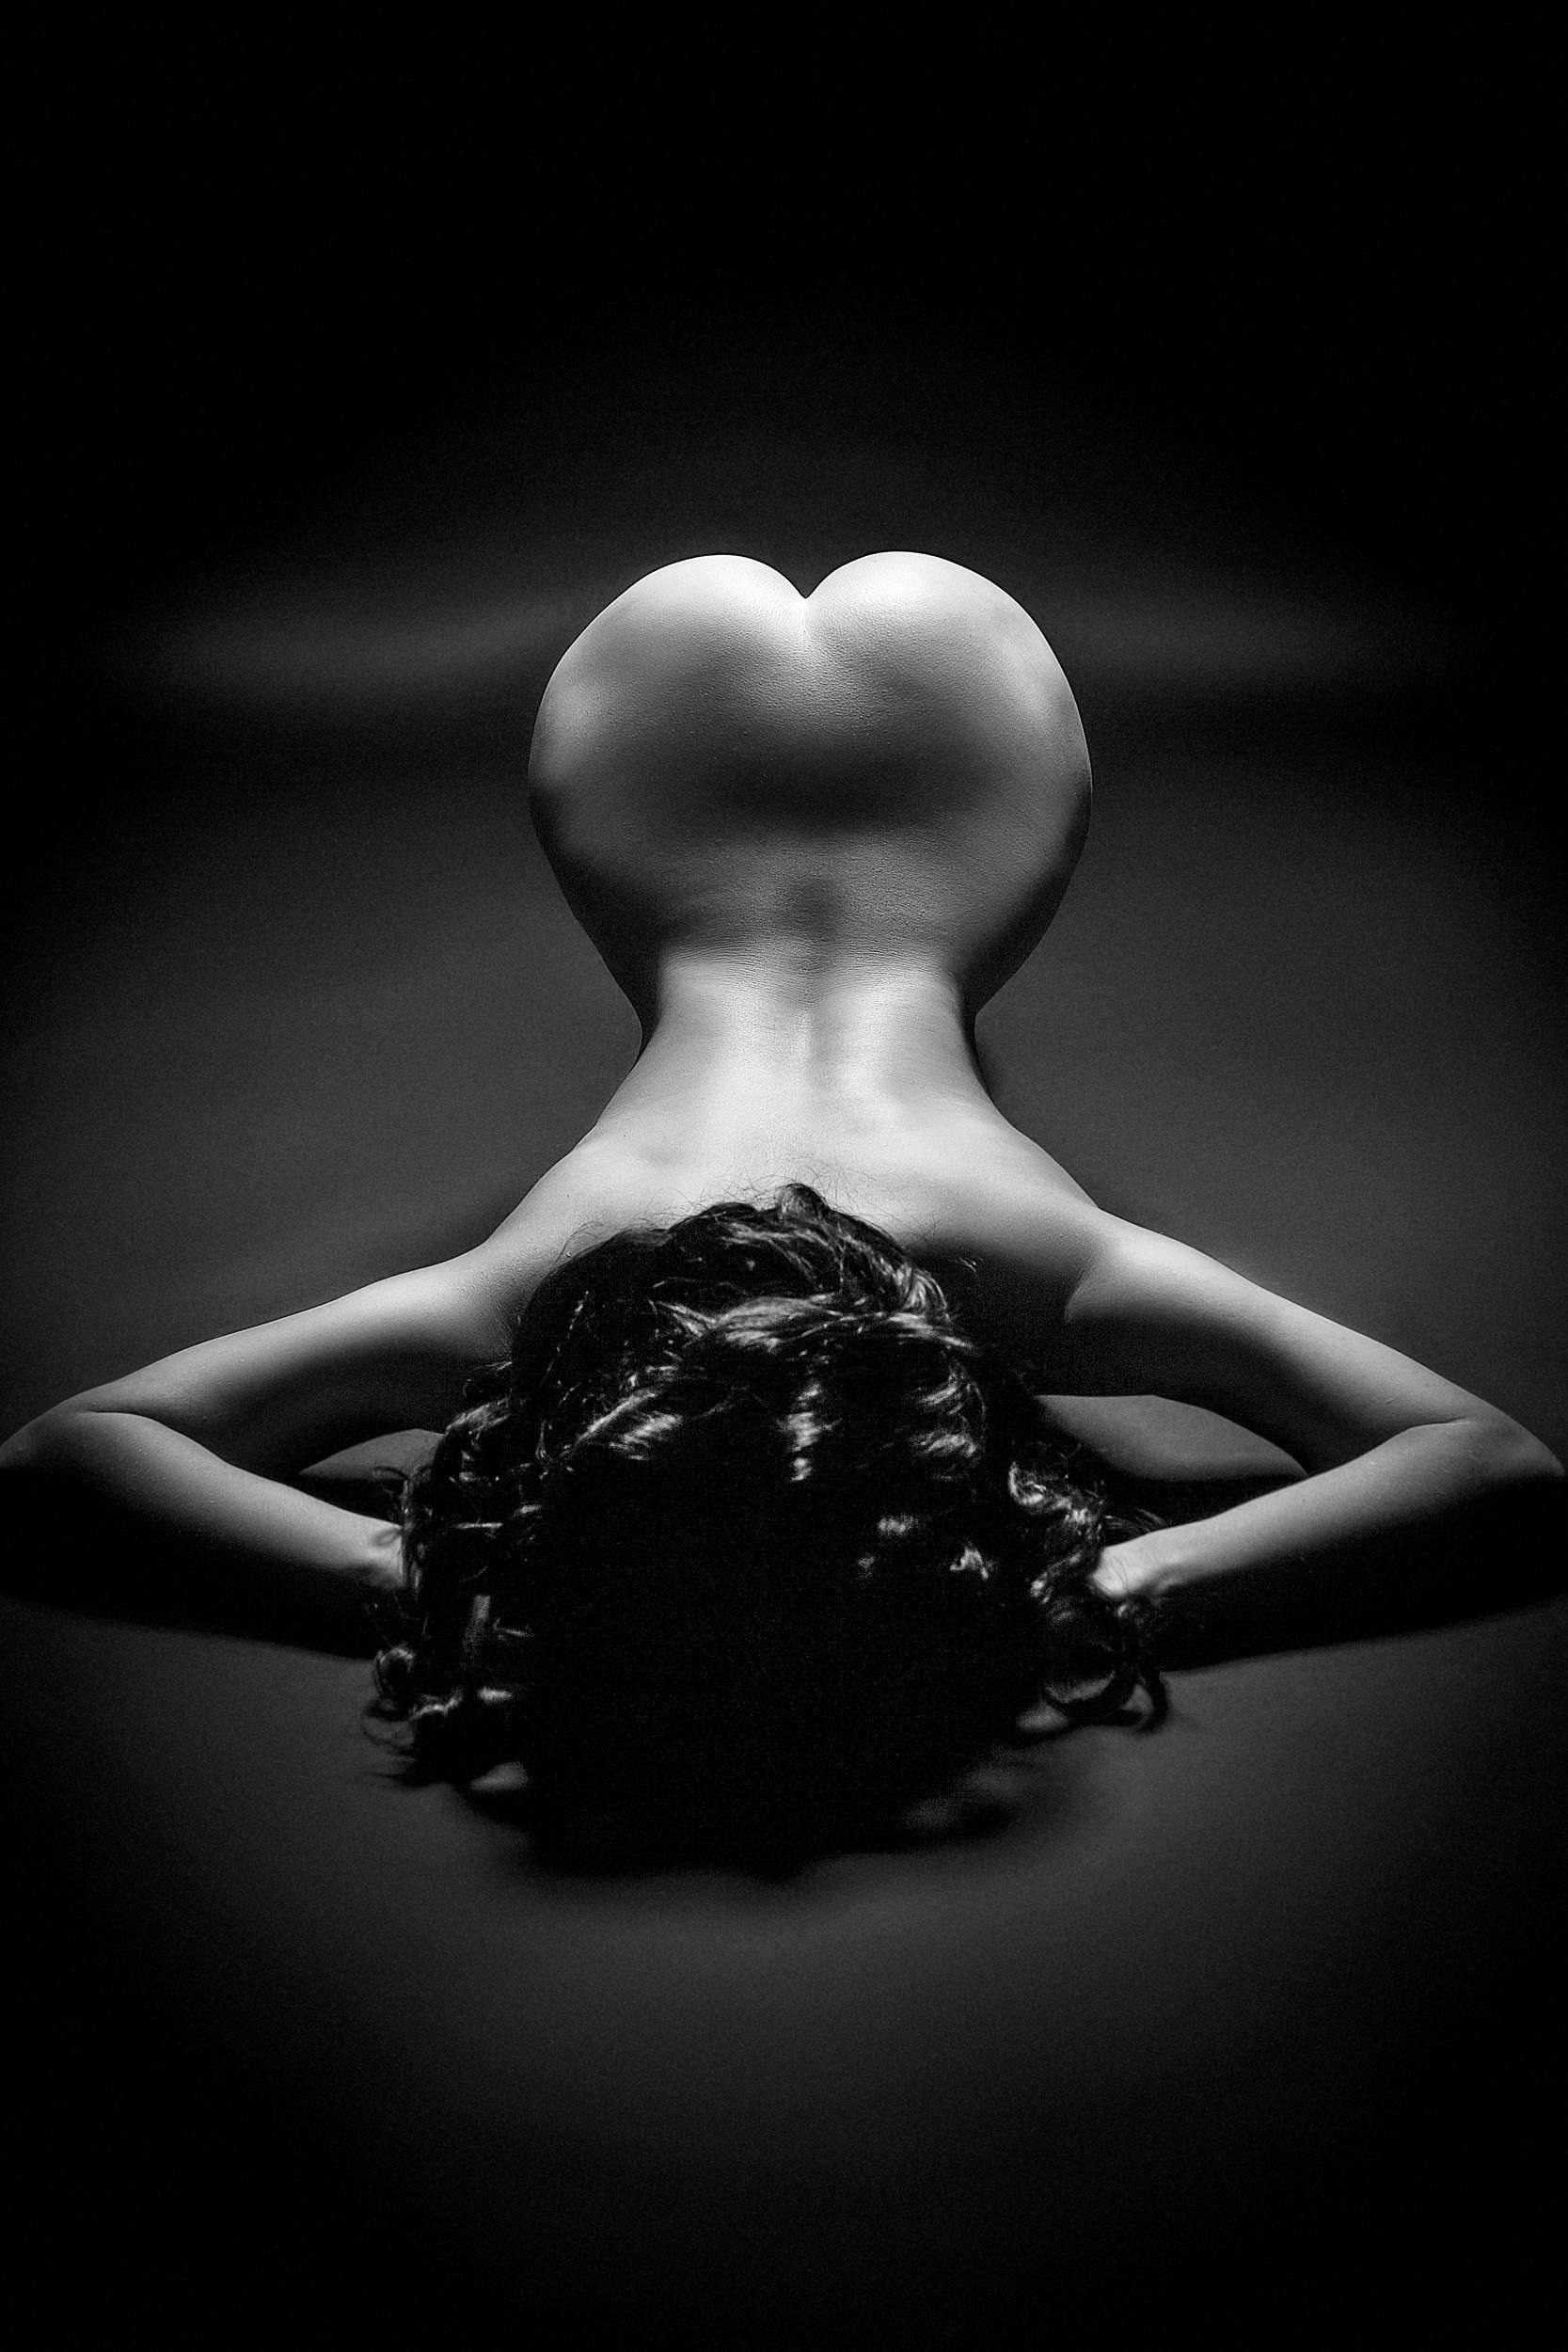 Woman laying on the floor, arms raised, back arched, accentuating the slim waist and wider thighs, captured in black and white by Ruslan Bolgov.